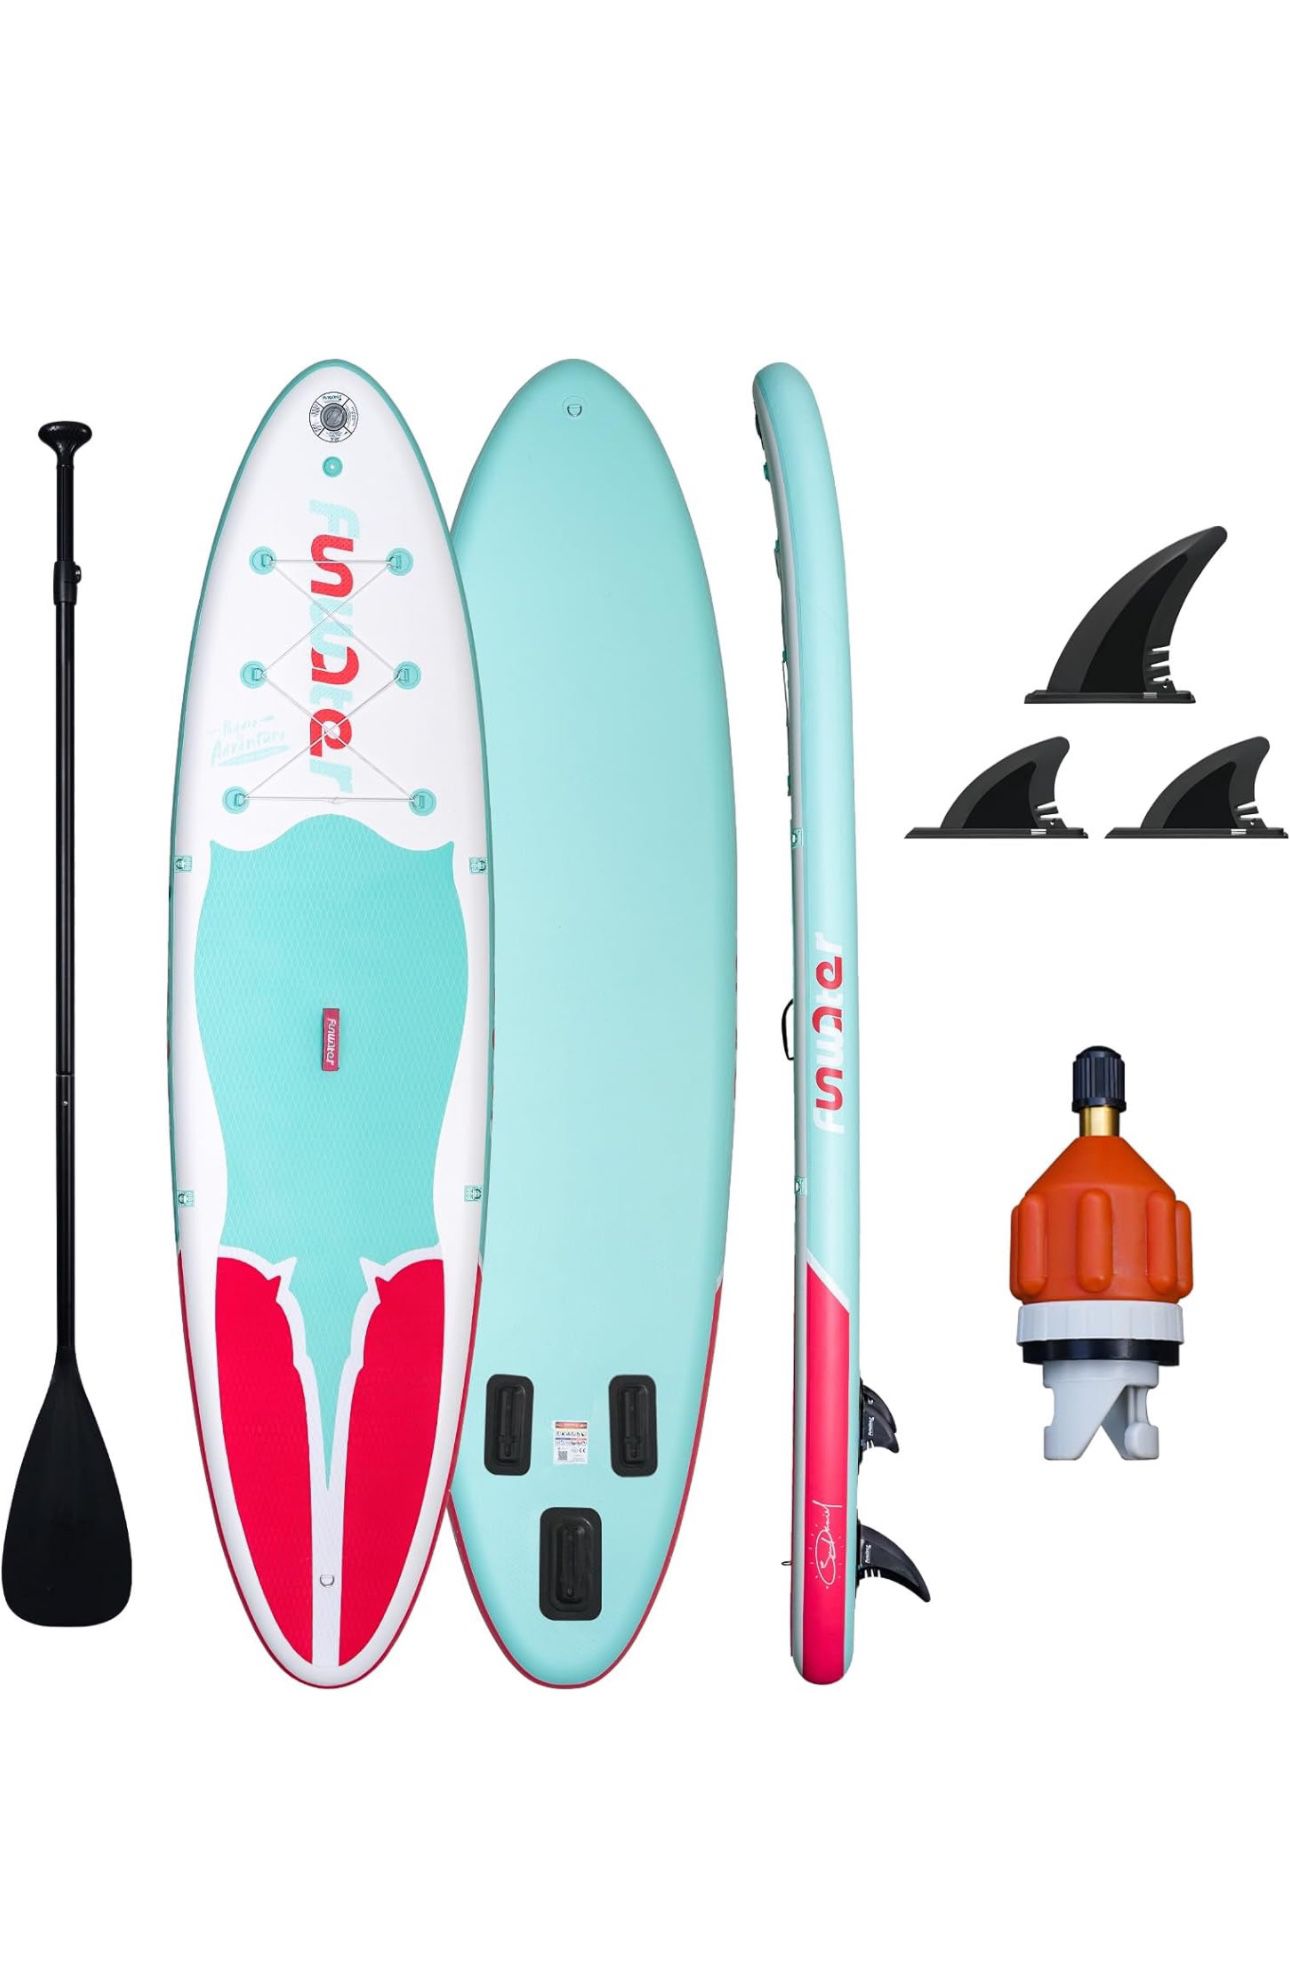 Inflatable-paddle-board (new In Box)